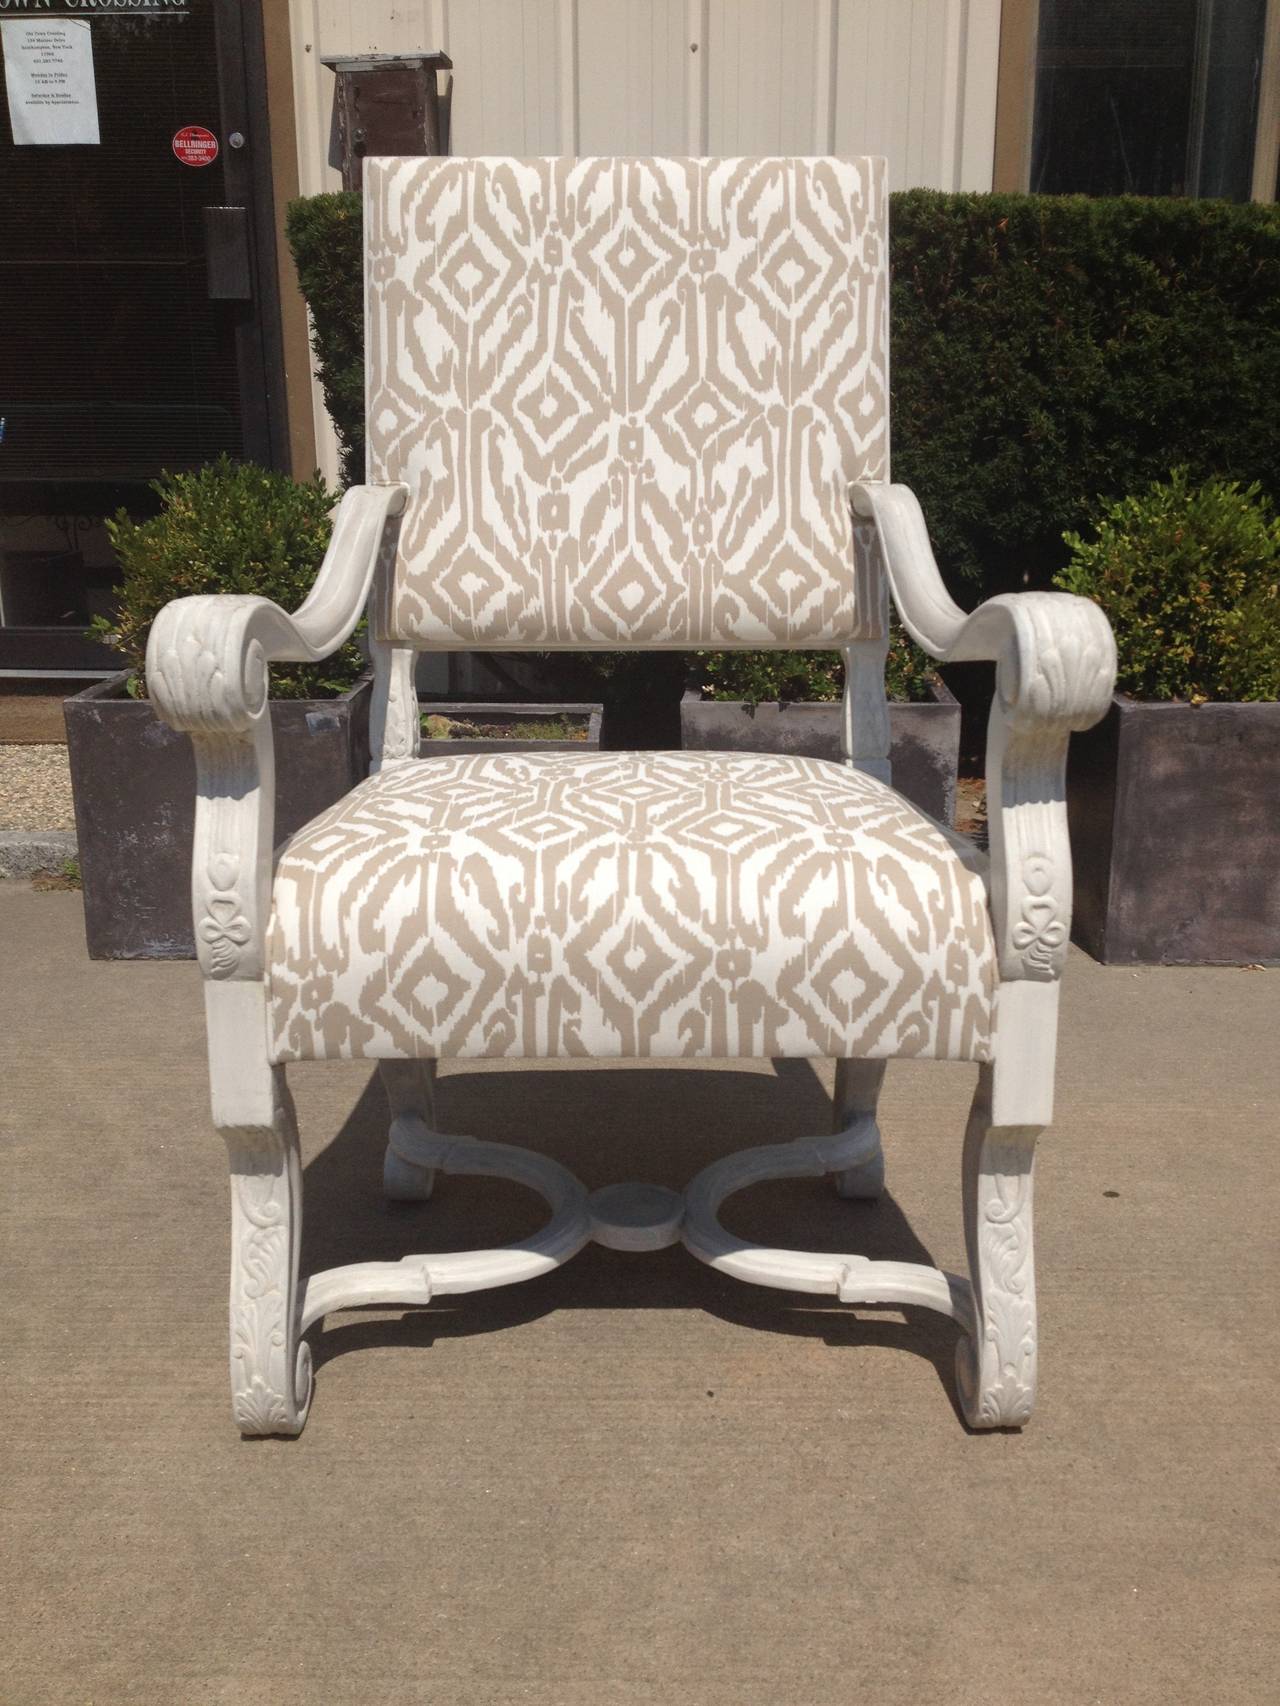 Chateau chairs, made of carved teak in a sealed finish, comes in a selection of finishes, driftwood French greige, distressed white as shown, and many others to choose from.

Chairs are made with super fast drying top of the line materials, and